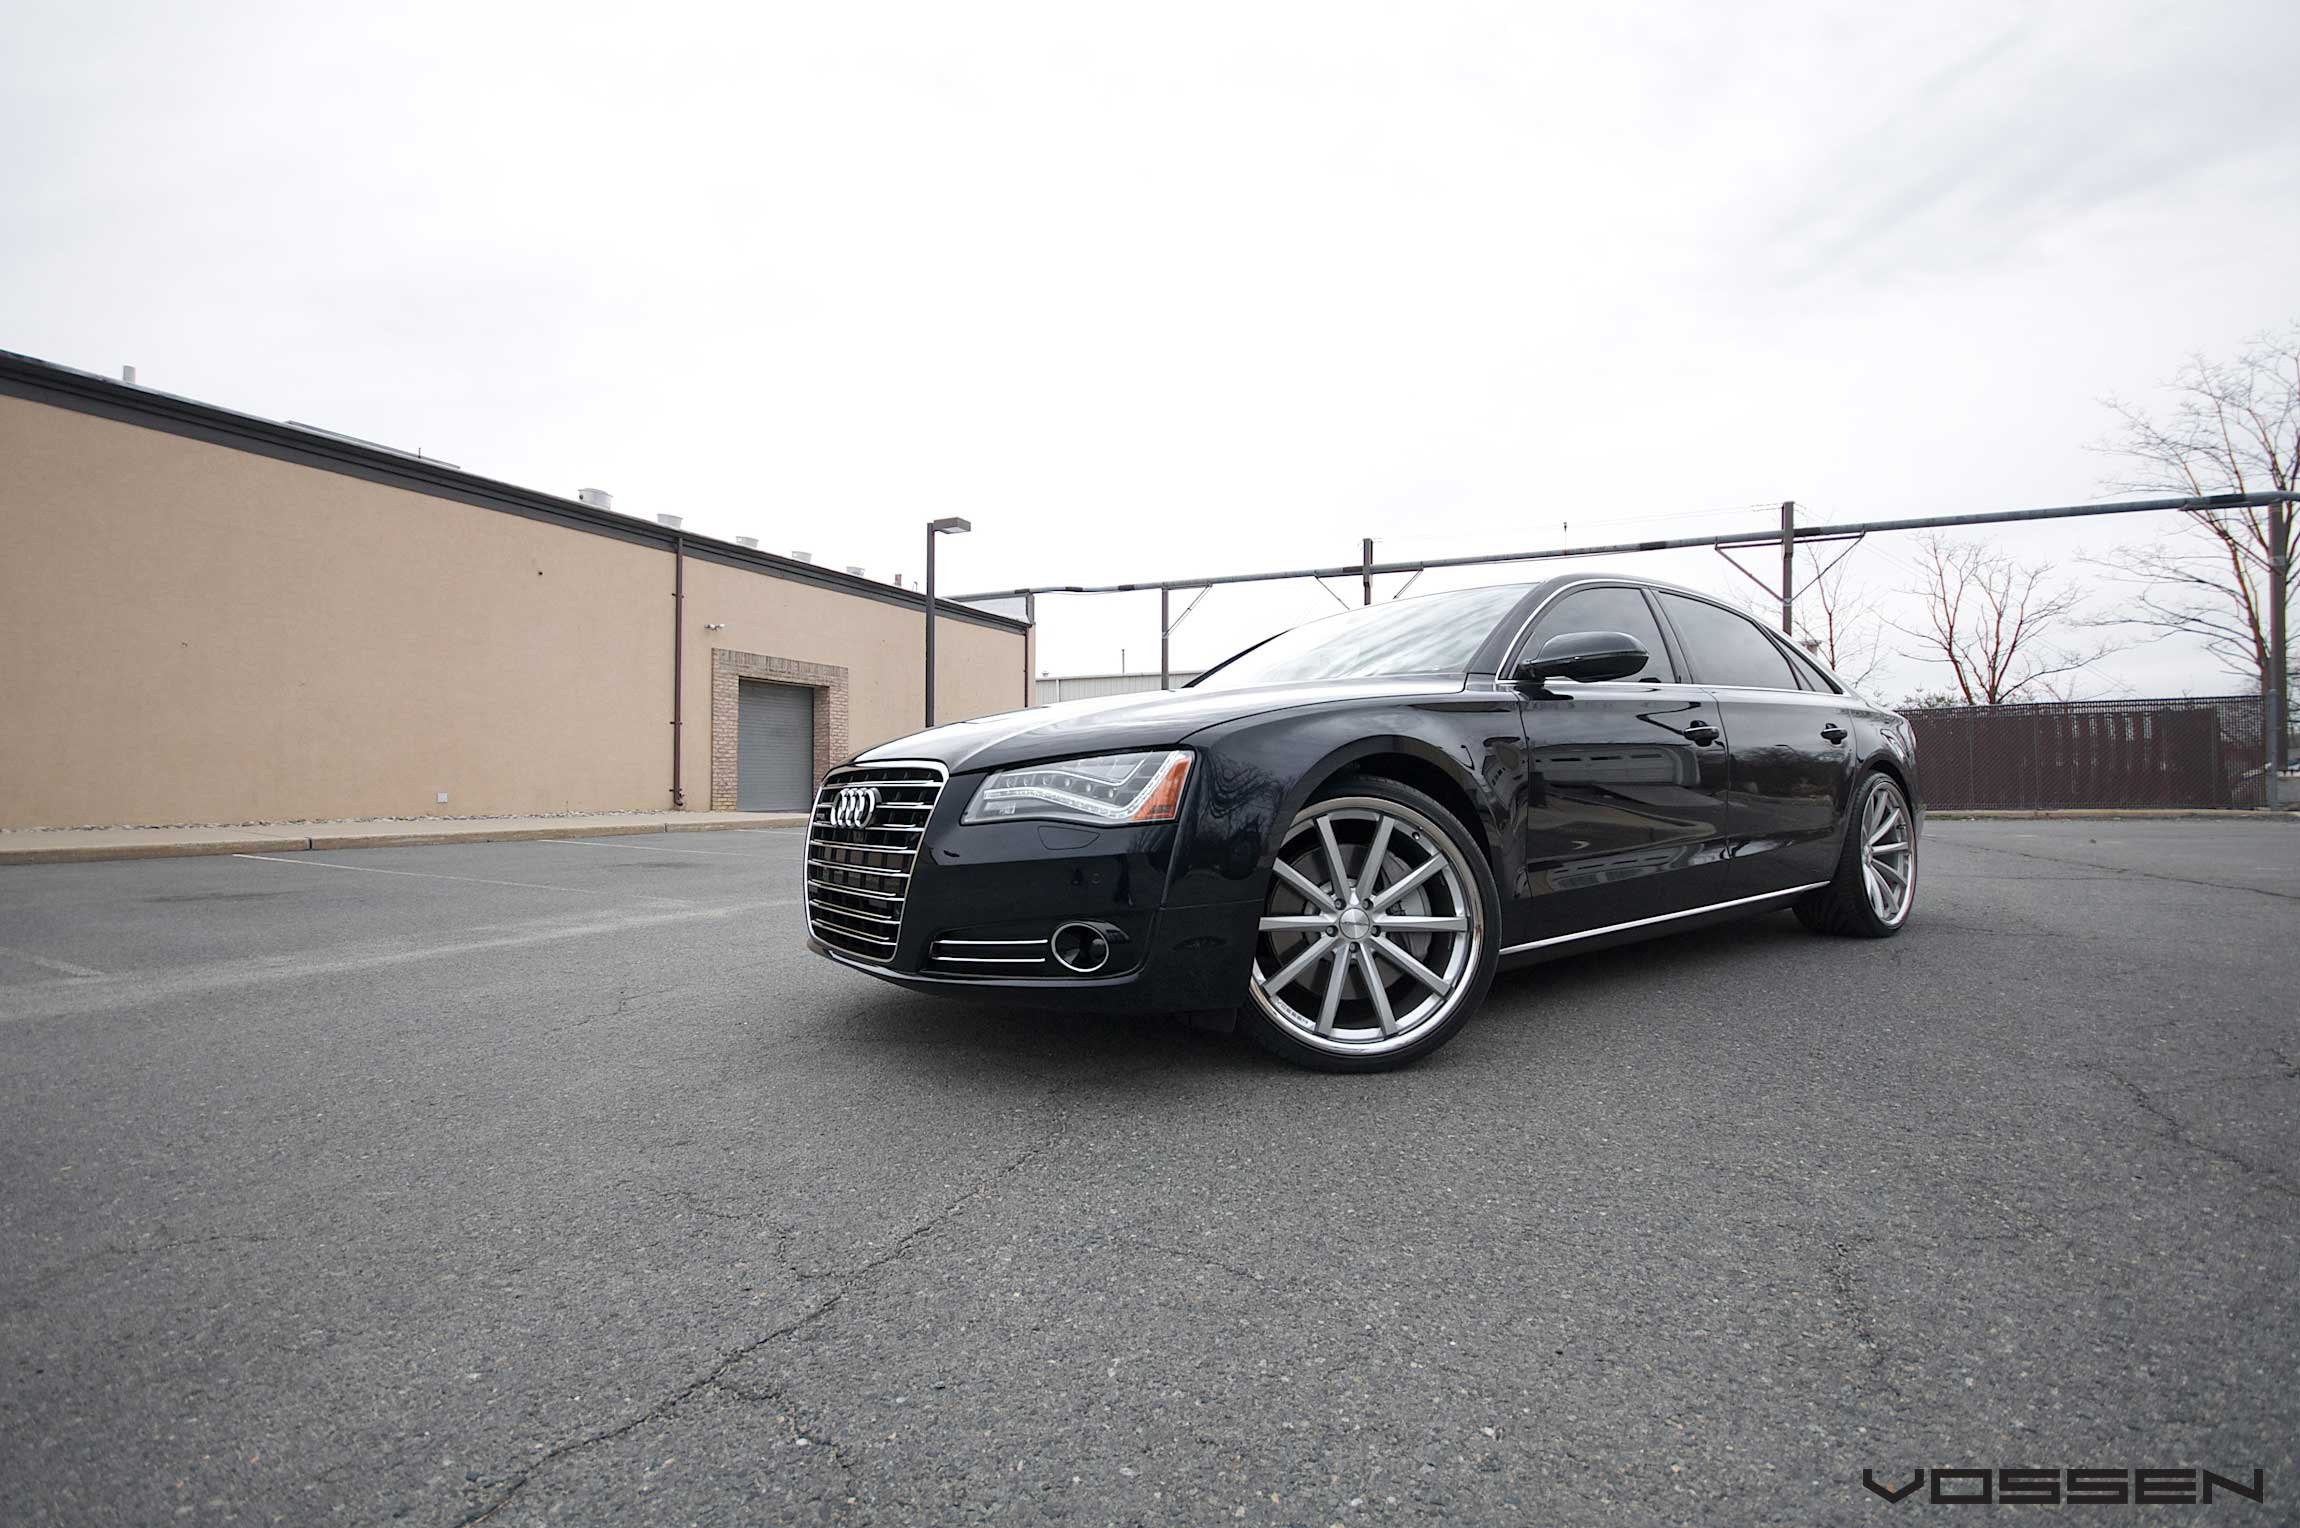 Black Audi A8 with Custom Chrome Grille - Photo by Vossen